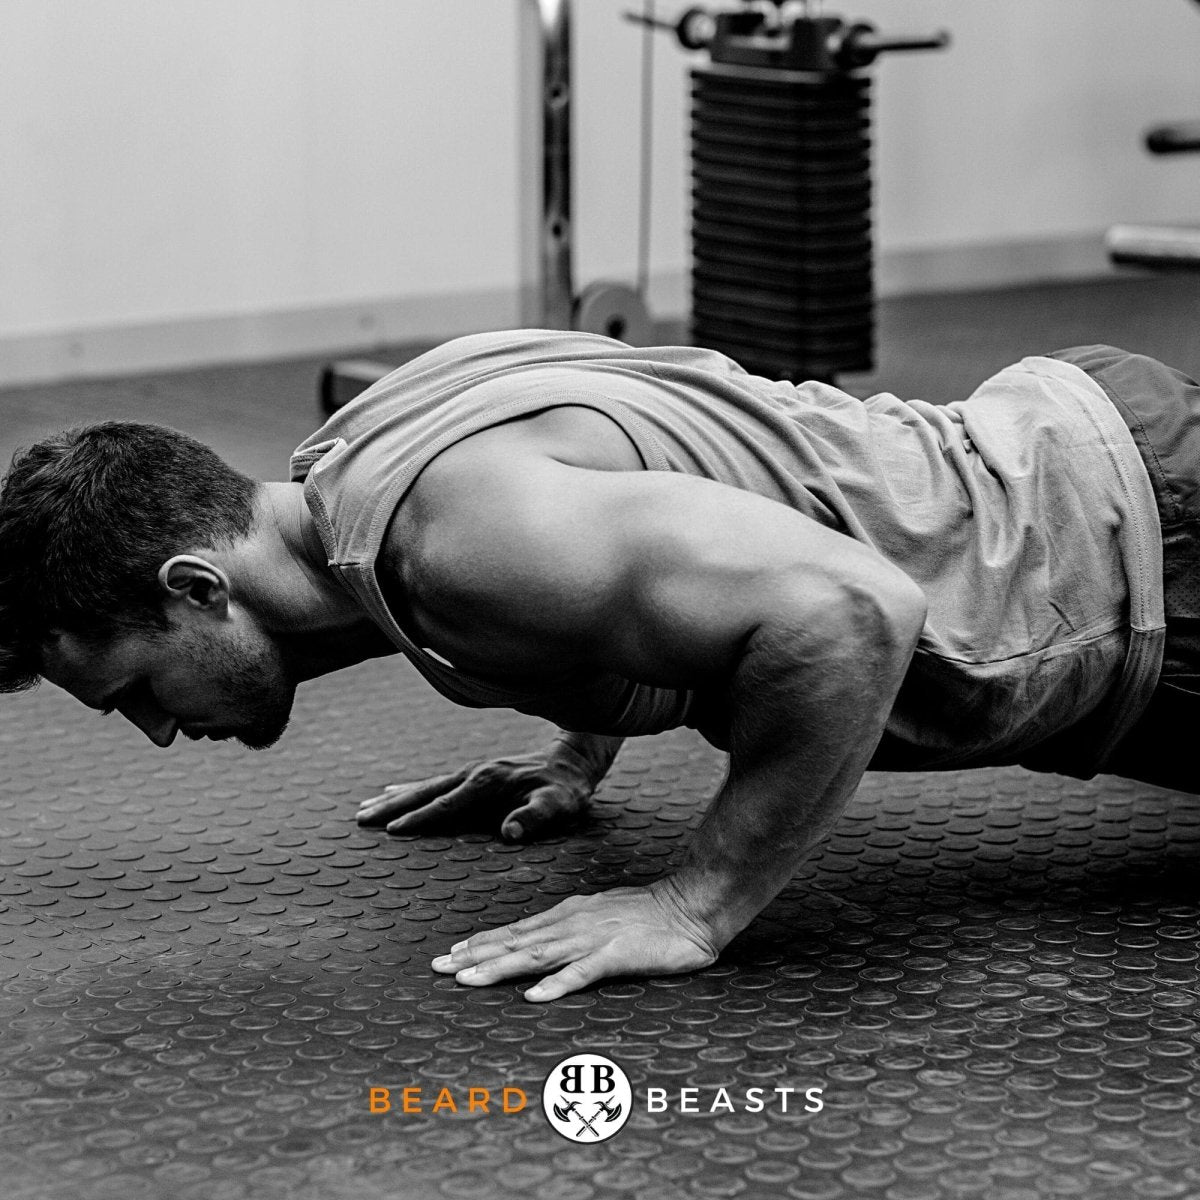 The Health Benefits of Push-Ups and How to Do Them Effectively